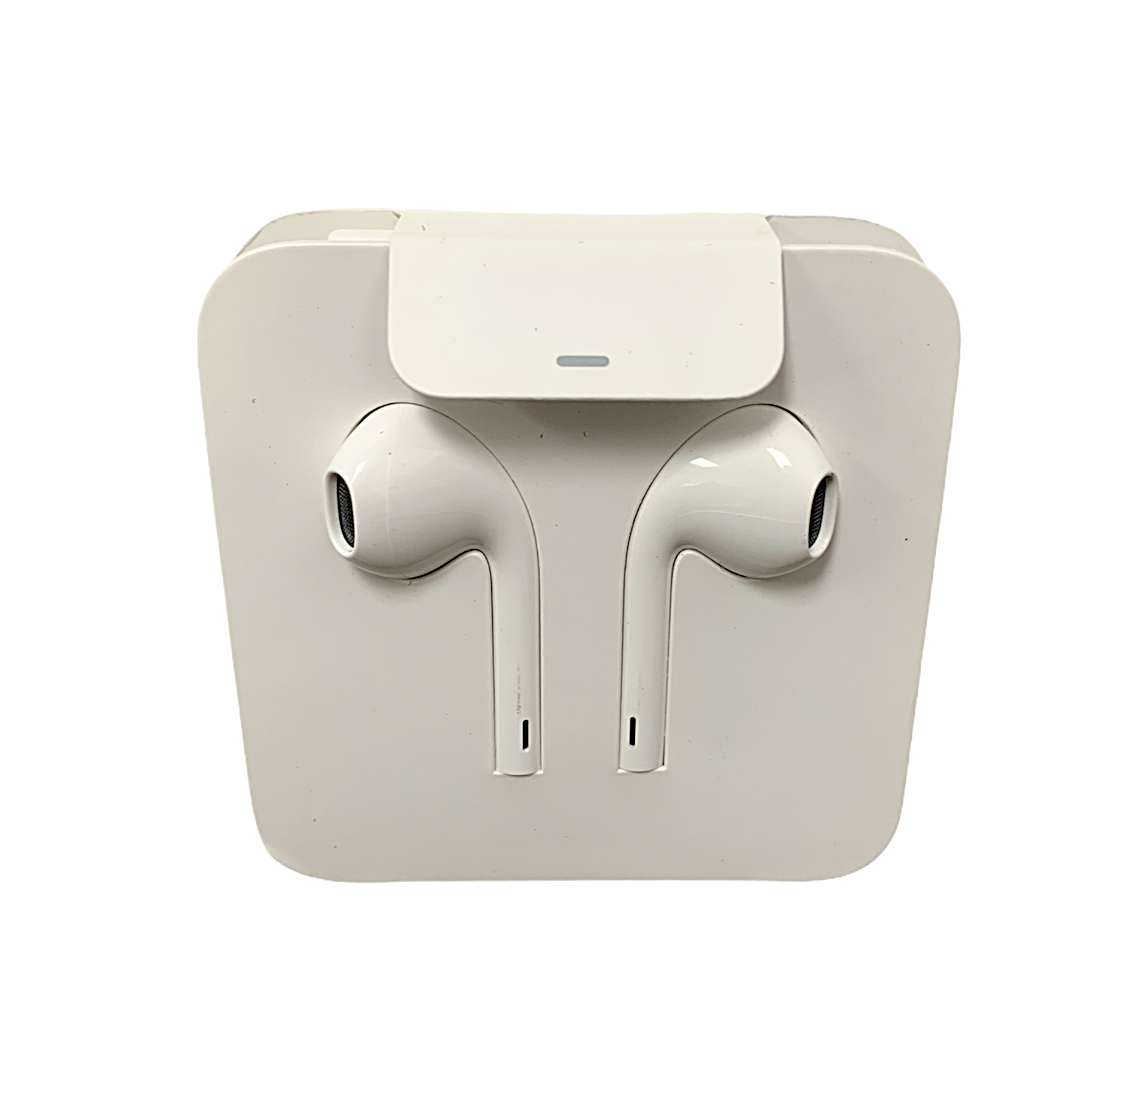 Apple EarPods with Lightning Connector for iPhone & iPad, MMTN2AM/A